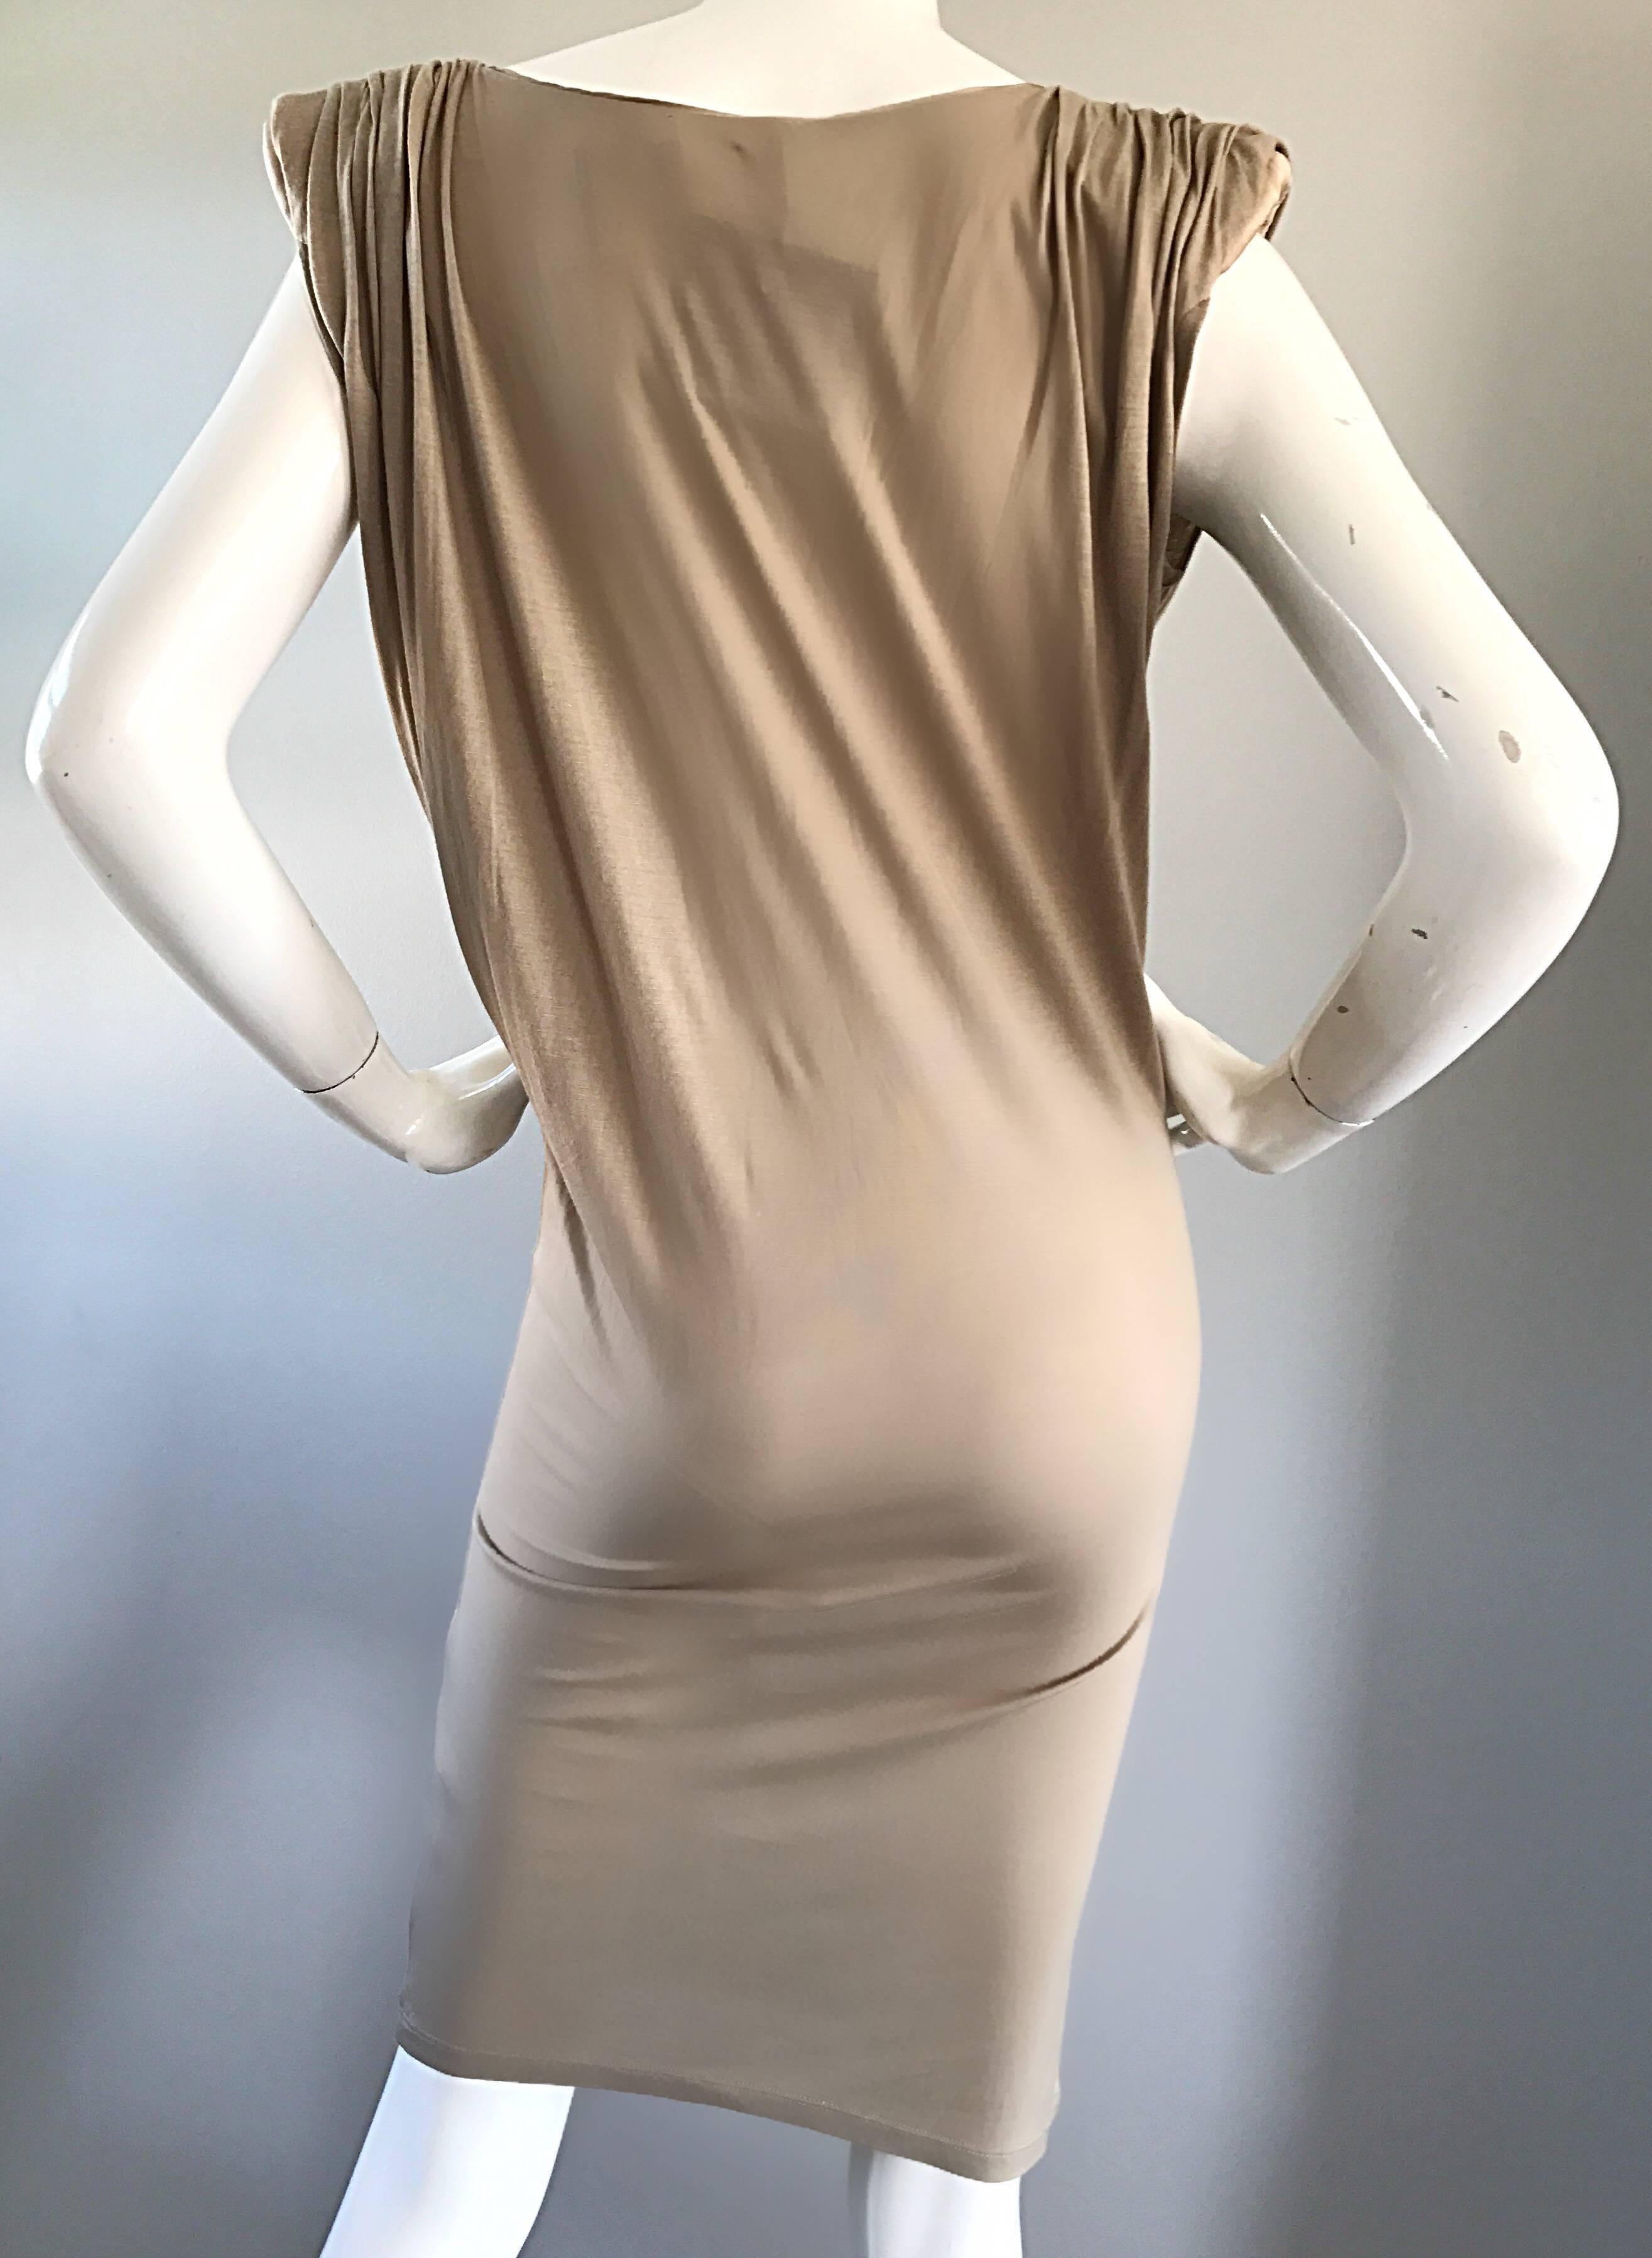 Women's New Lanvin Alber Elbaz Taupe Strong Shoulder Taupe Silk Avant Garde Dress NWT  For Sale